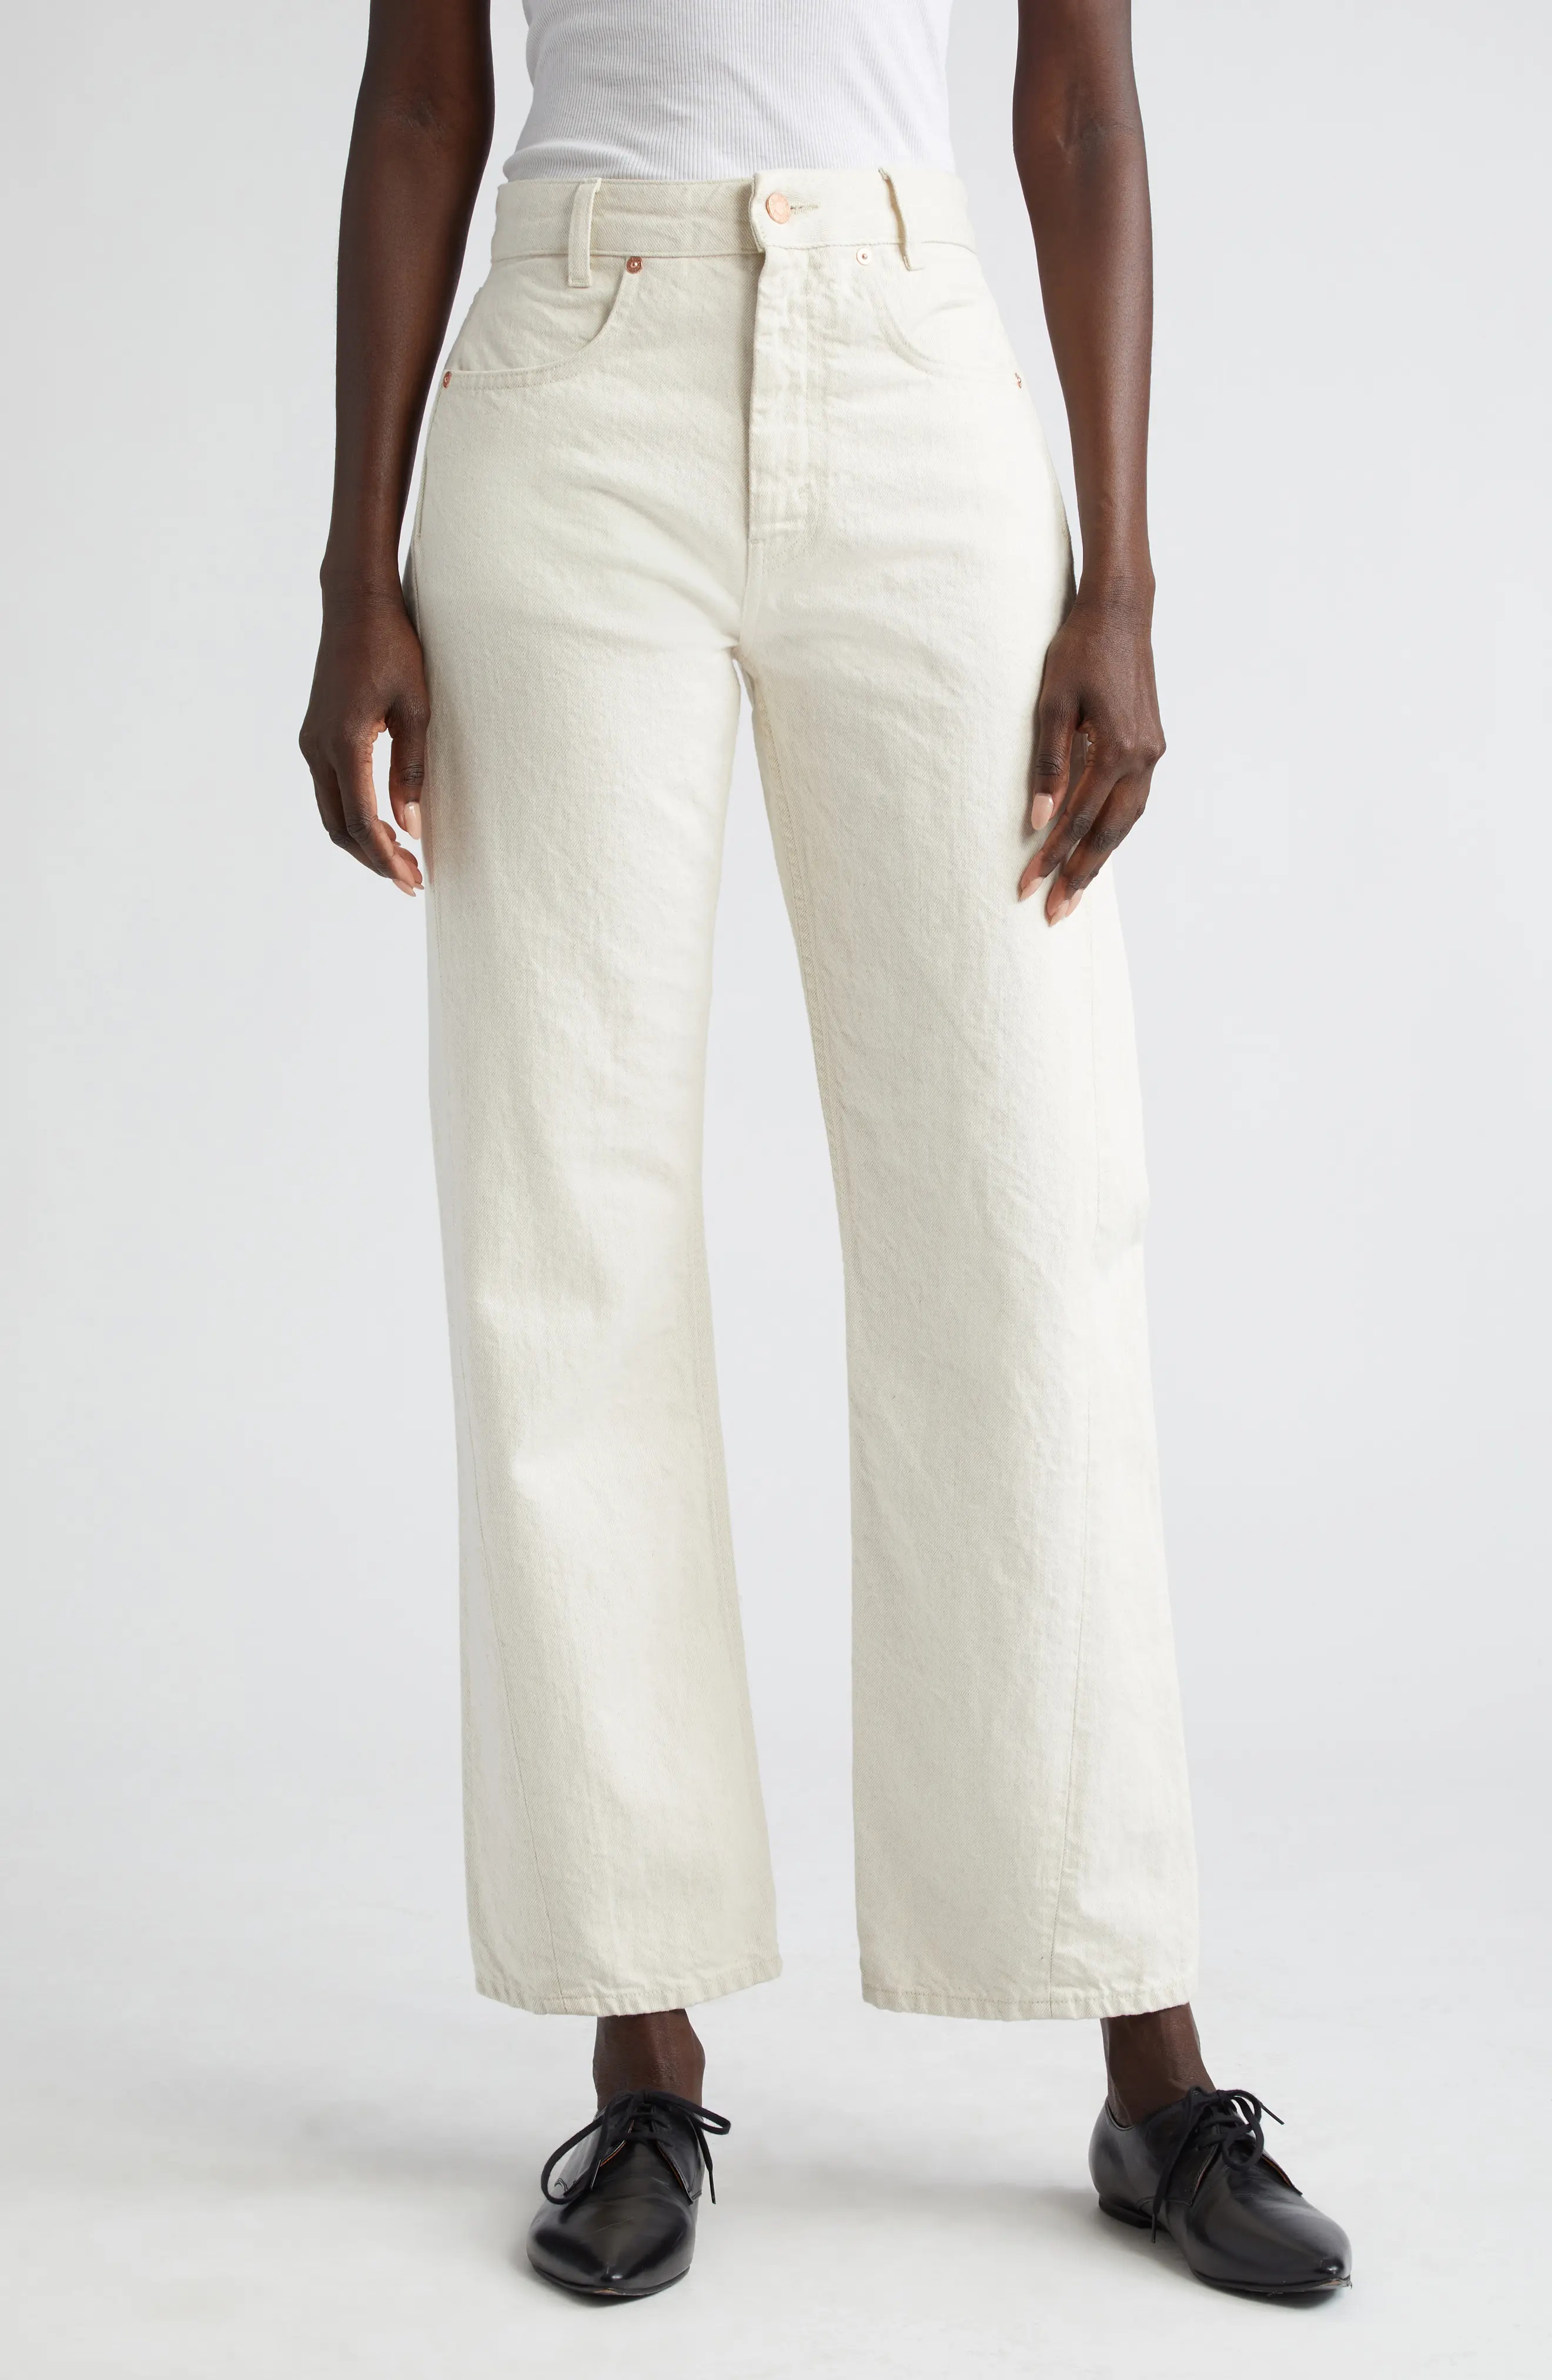 Curved Organic Cotton & Linen Jeans - 1